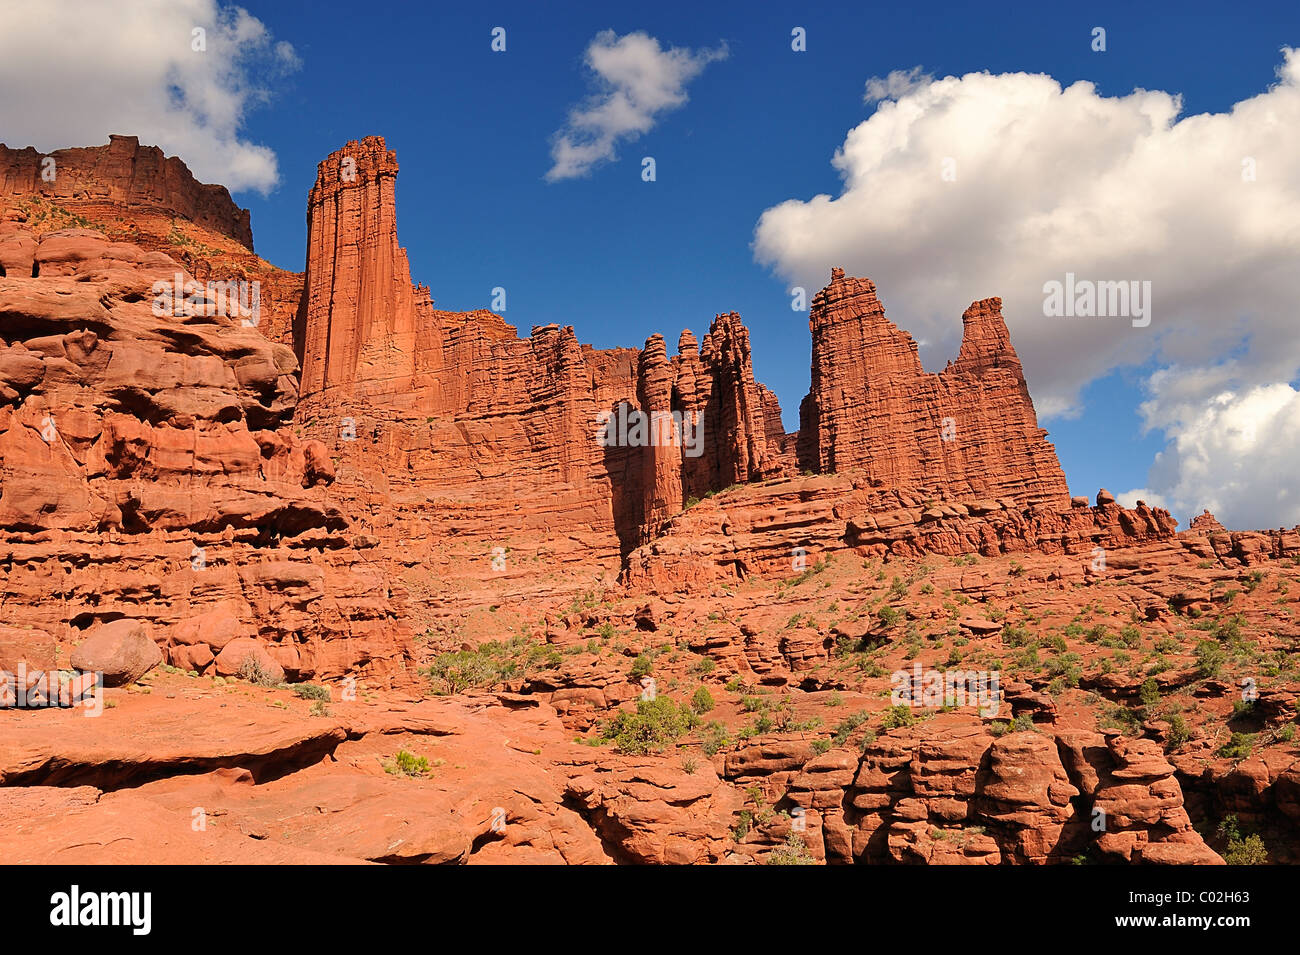 Fisher Towers in the Colorado River waterway near Moab in Utah, USA Stock Photo